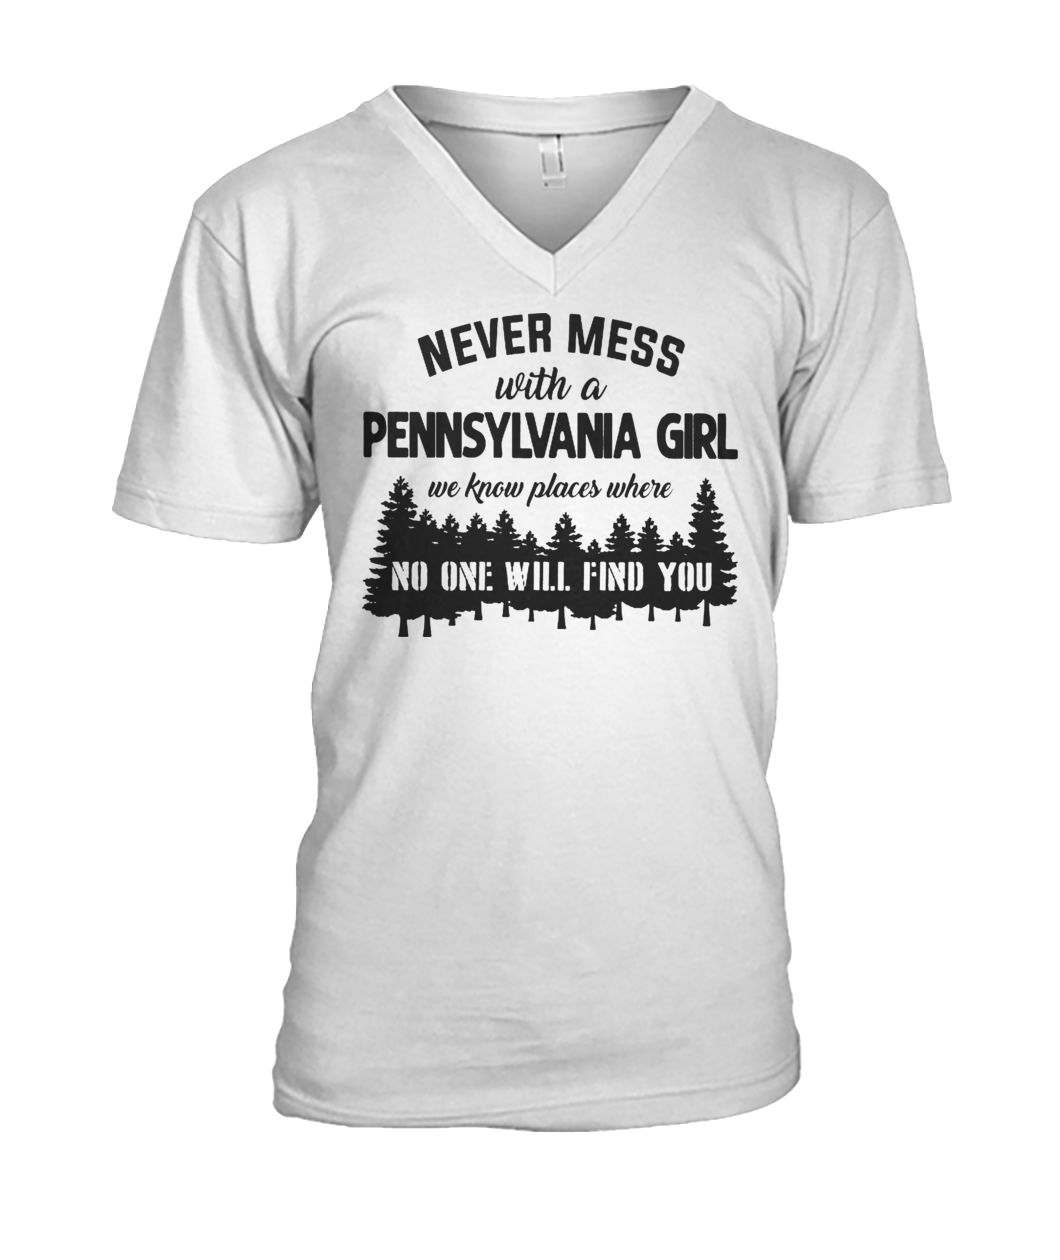 Never mess with a pennsylvania girl we know places where no one will find you mens v-neck